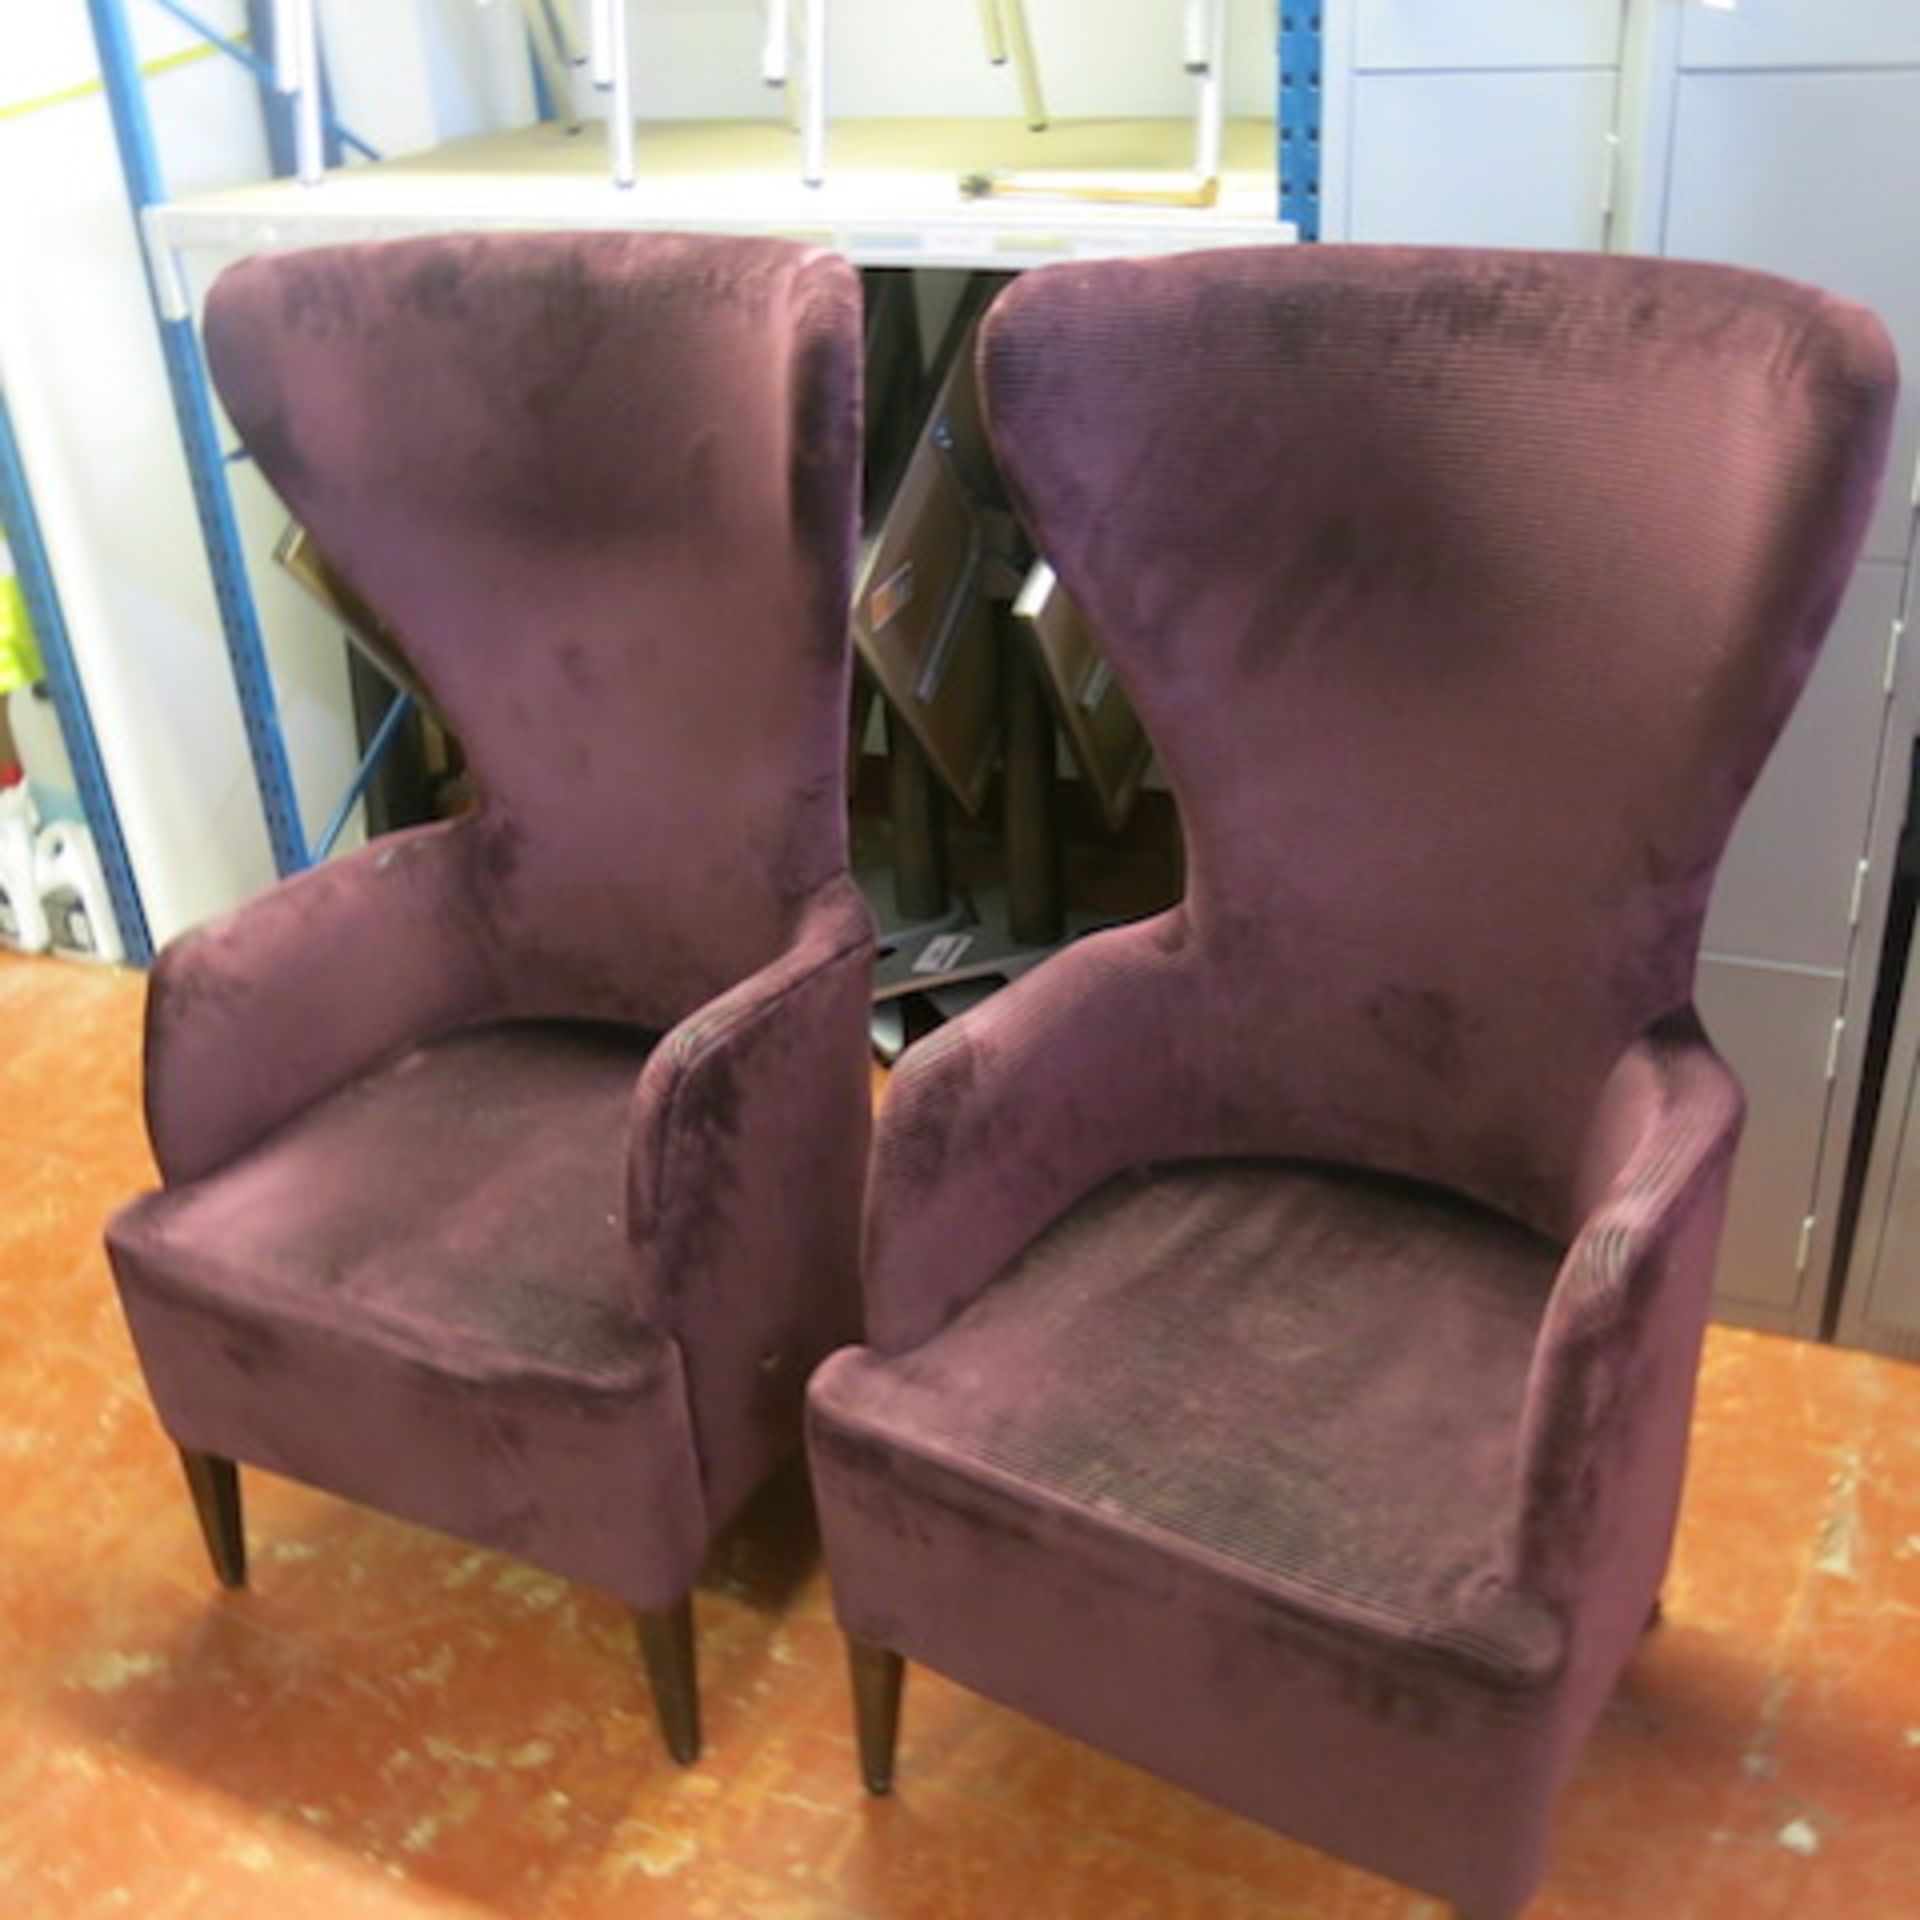 2 x Matching Crushed Velour Armchairs with Assorted Colour Striped Pattern and Plain Seat, Appears - Image 2 of 6